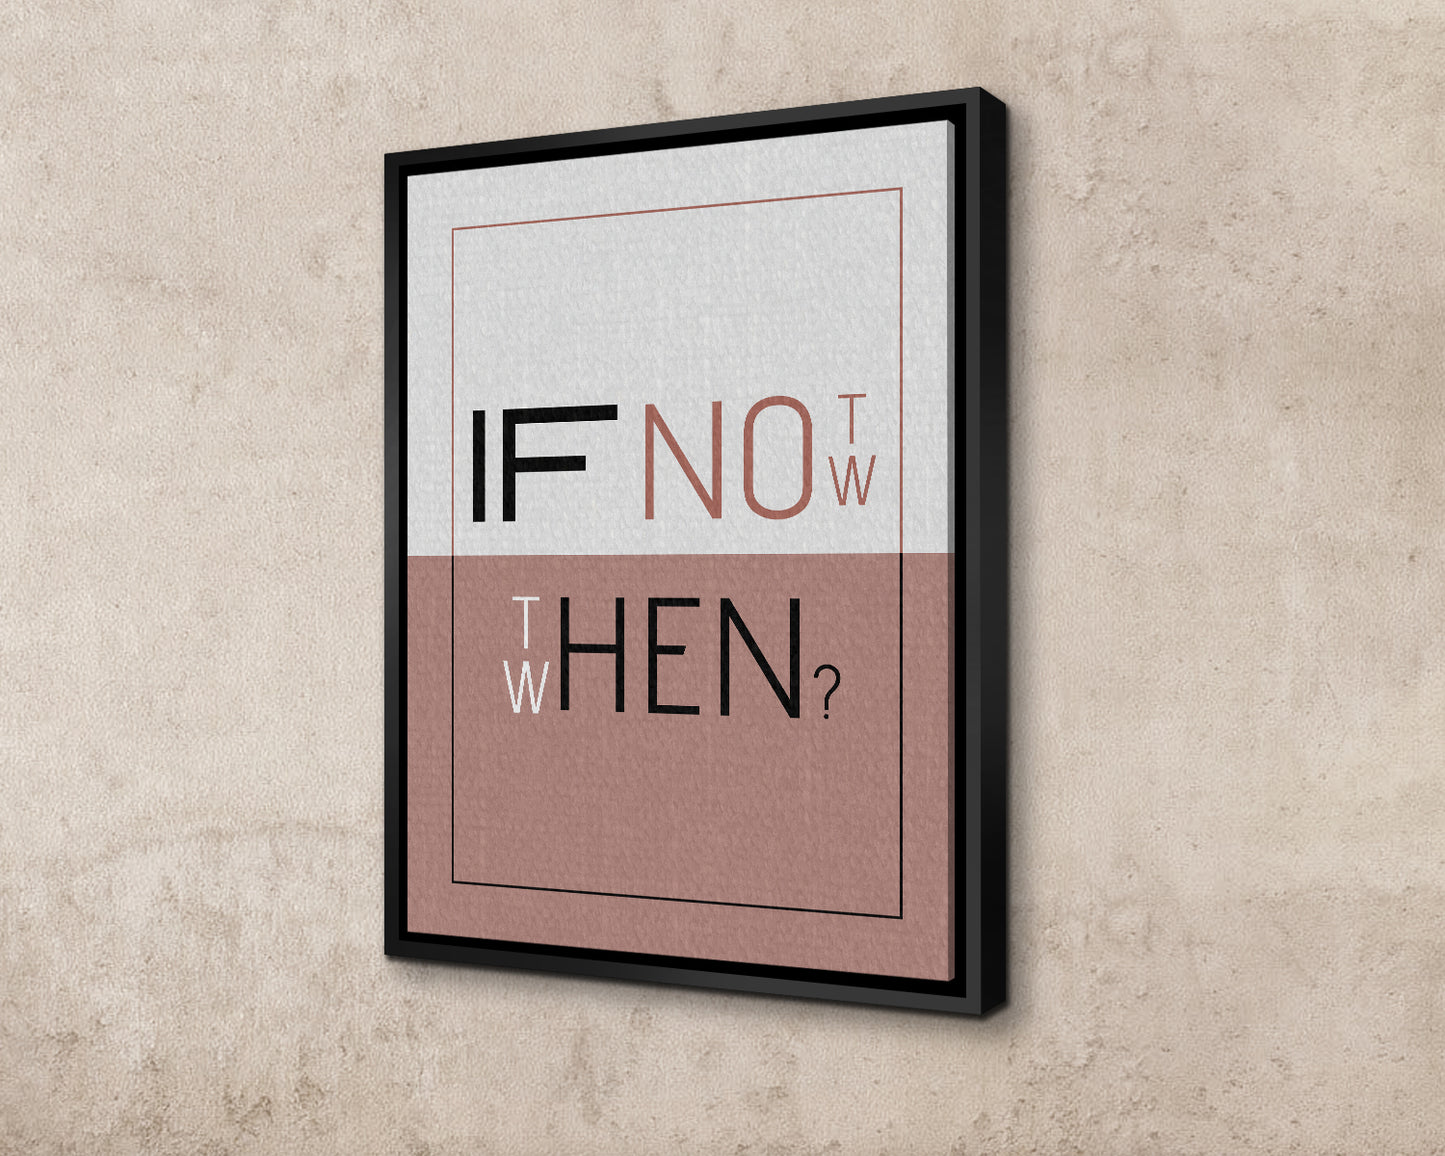 If no what then Canvas Wall Art 